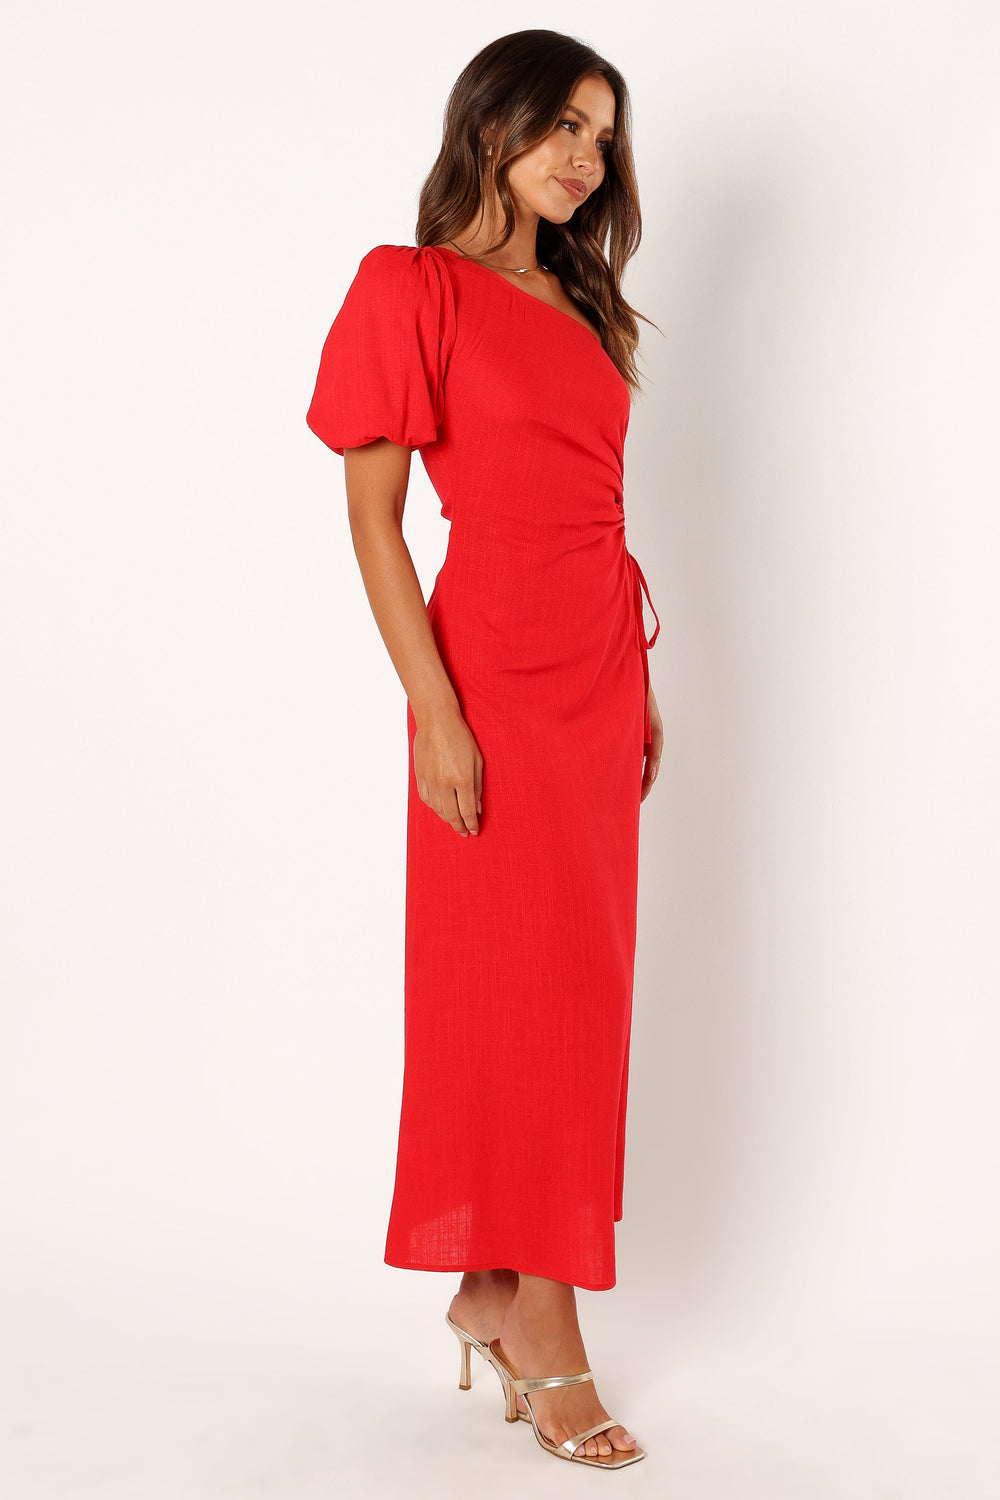 Petal and Pup USA DRESSES Kimmie One Shoulder Cut Out Midi Dress - Red